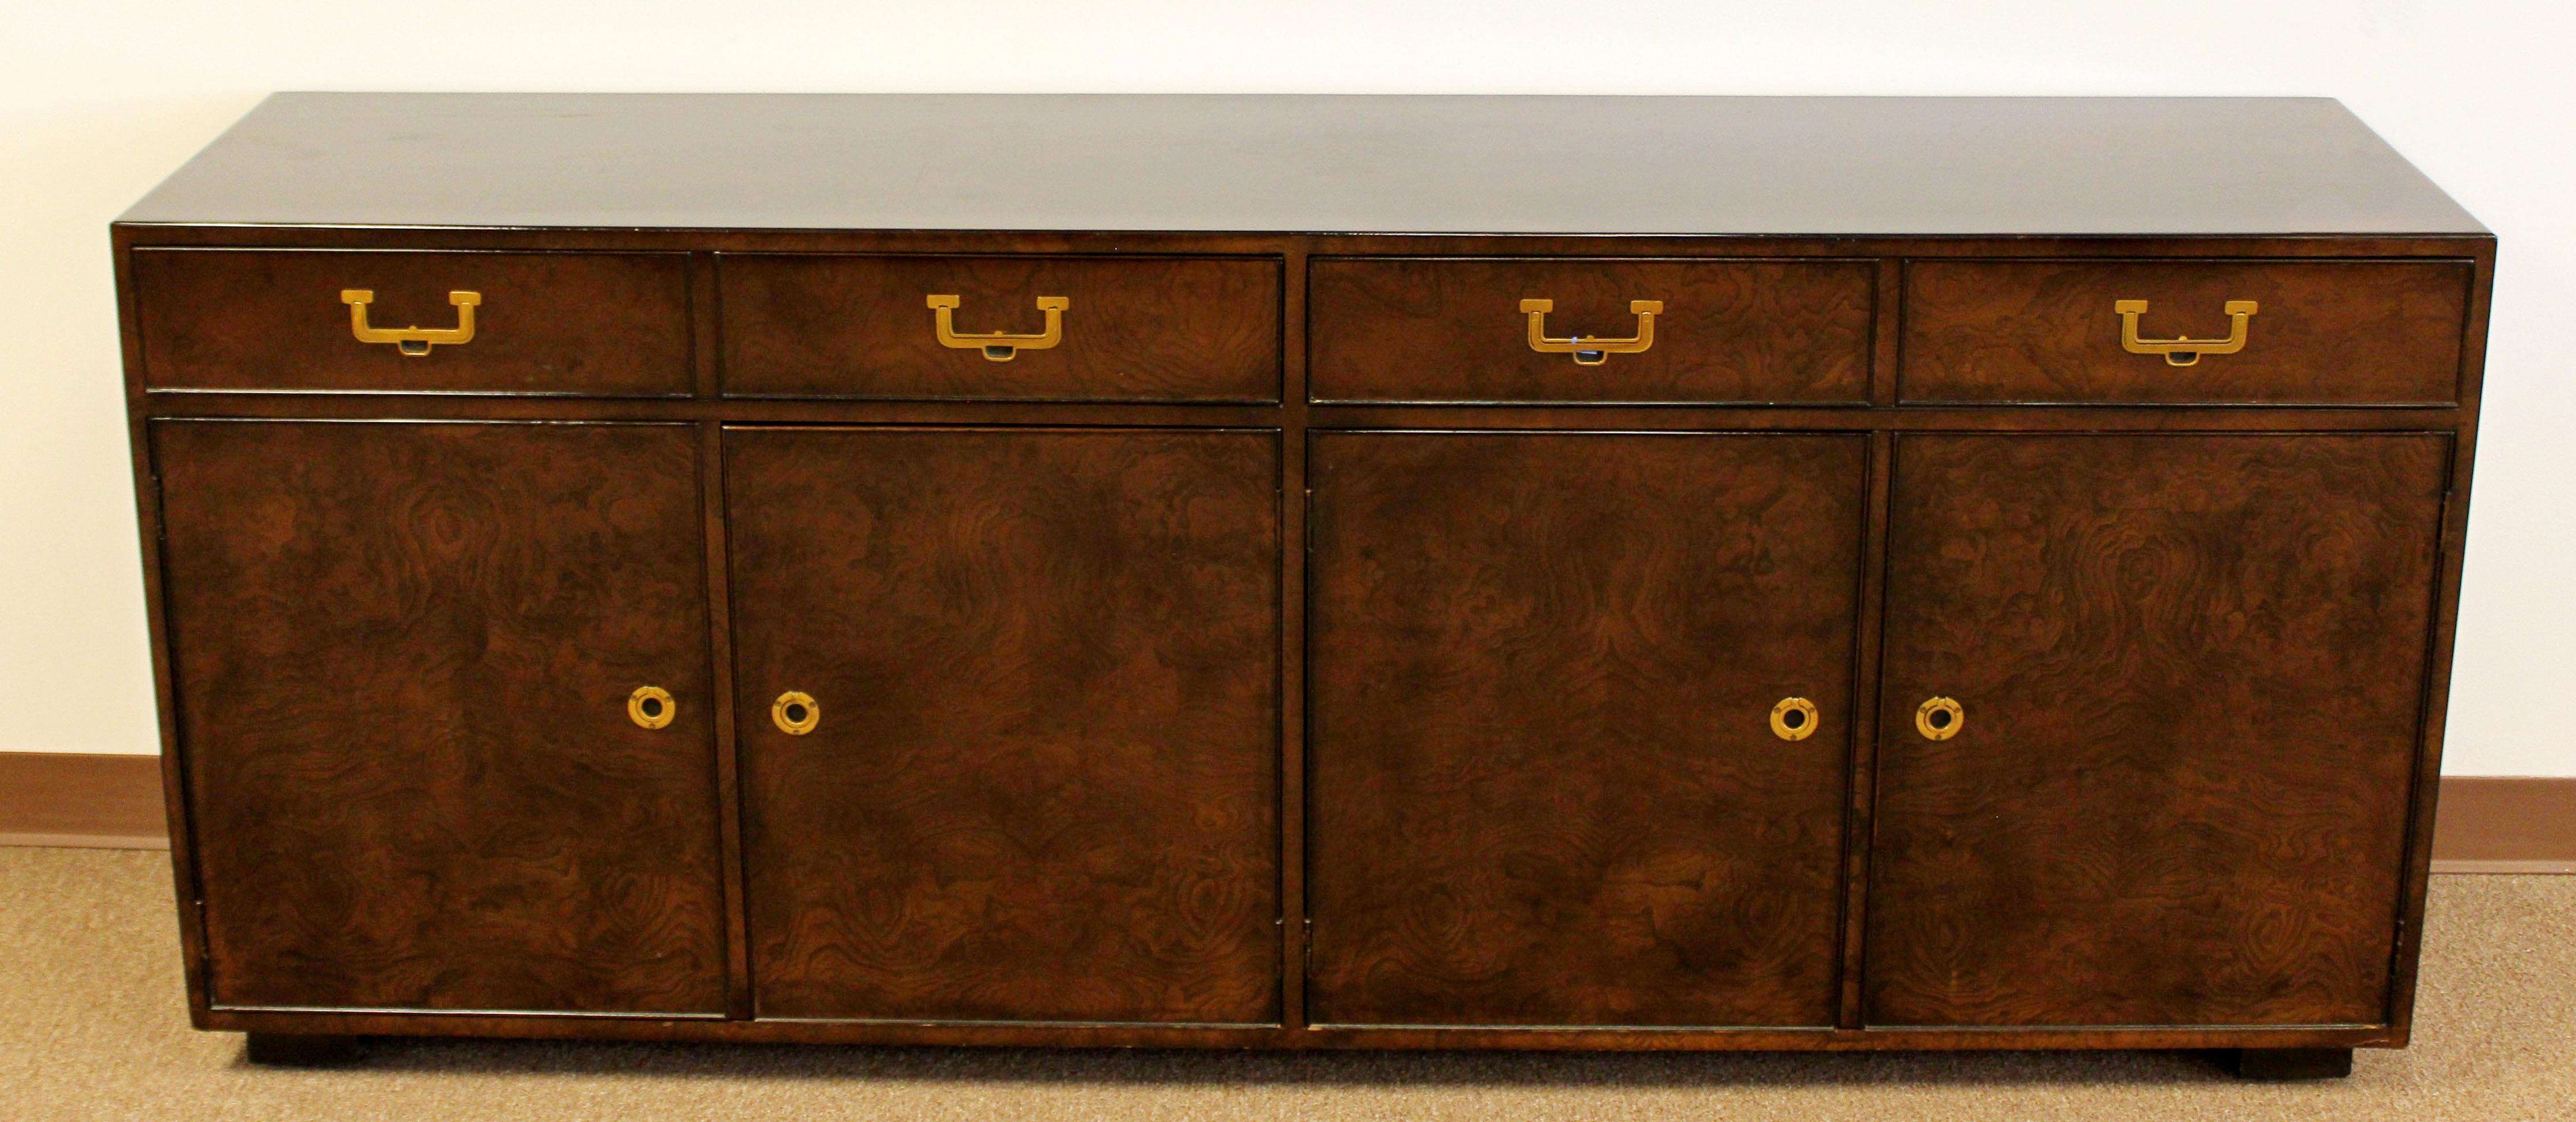 For your consideration is a phenomenal burl wood credenza, with brass pulls, two shelves and two drawers, by John Widdicomb, circa the 1950s. In good vintage condition. The dimensions are 76